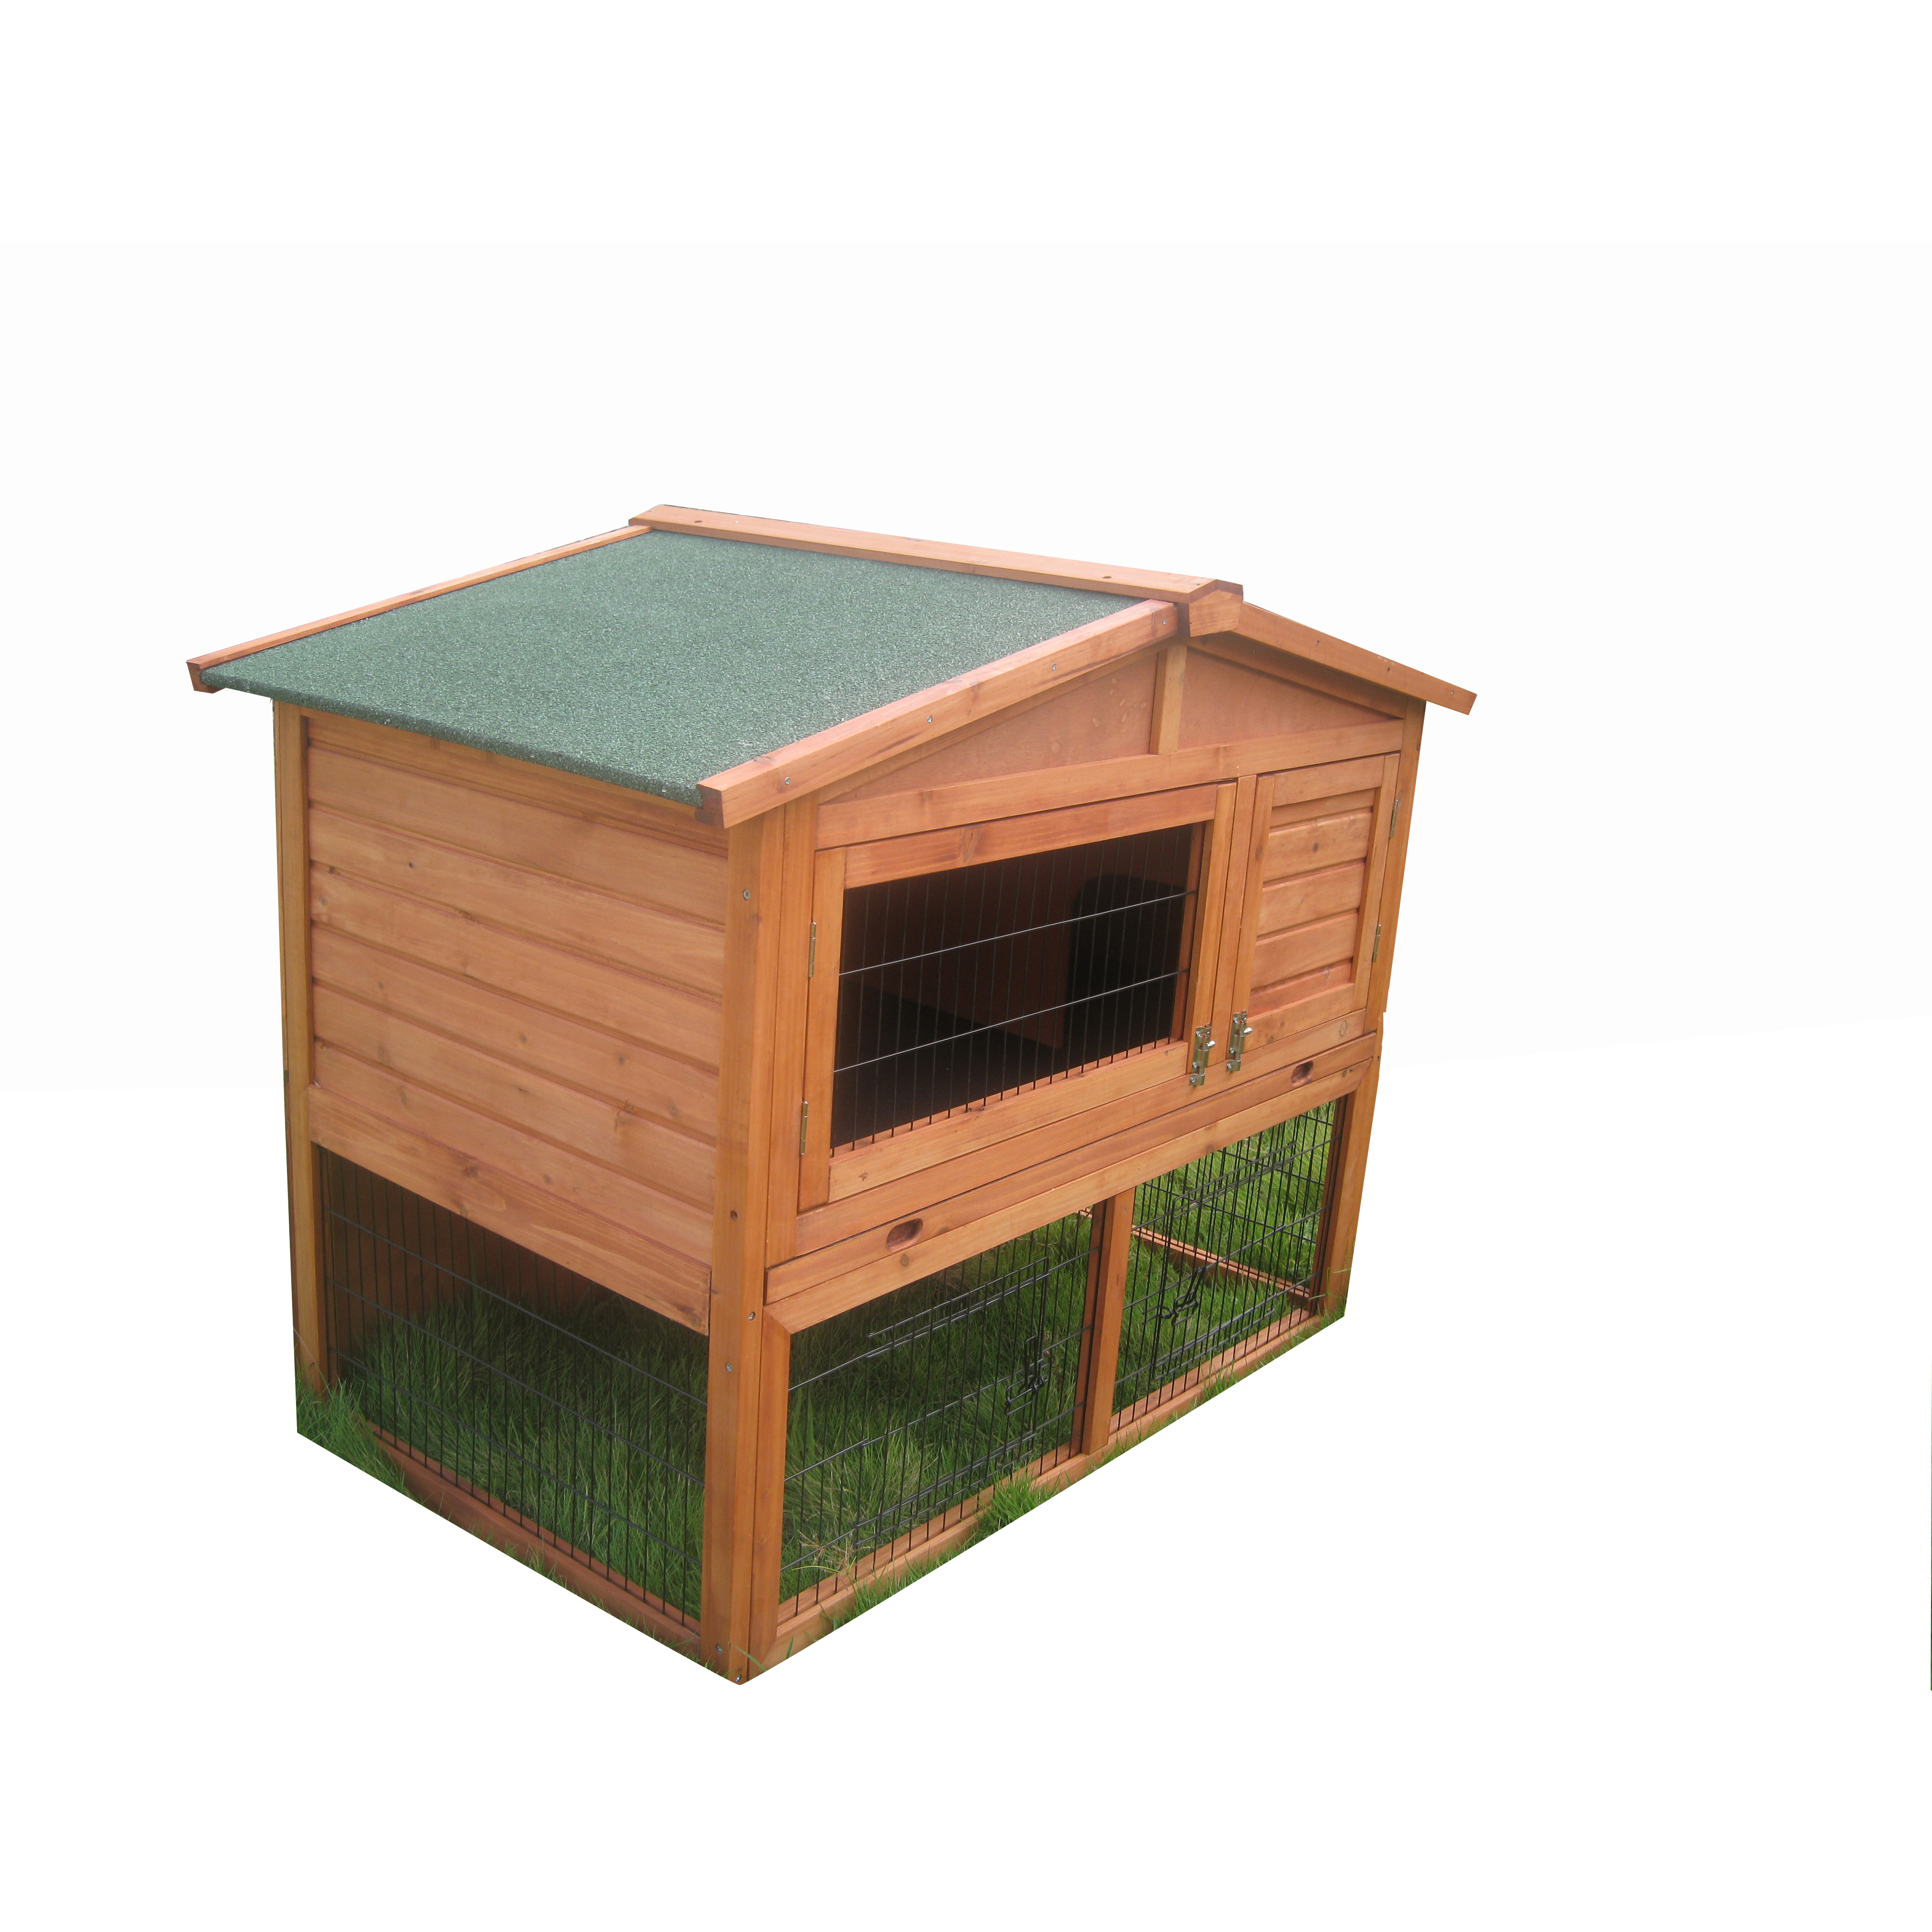 2-Story Weatherproof Stackable Small Animals Wooden Bunny Guinea Pig House Rabbit Hutch